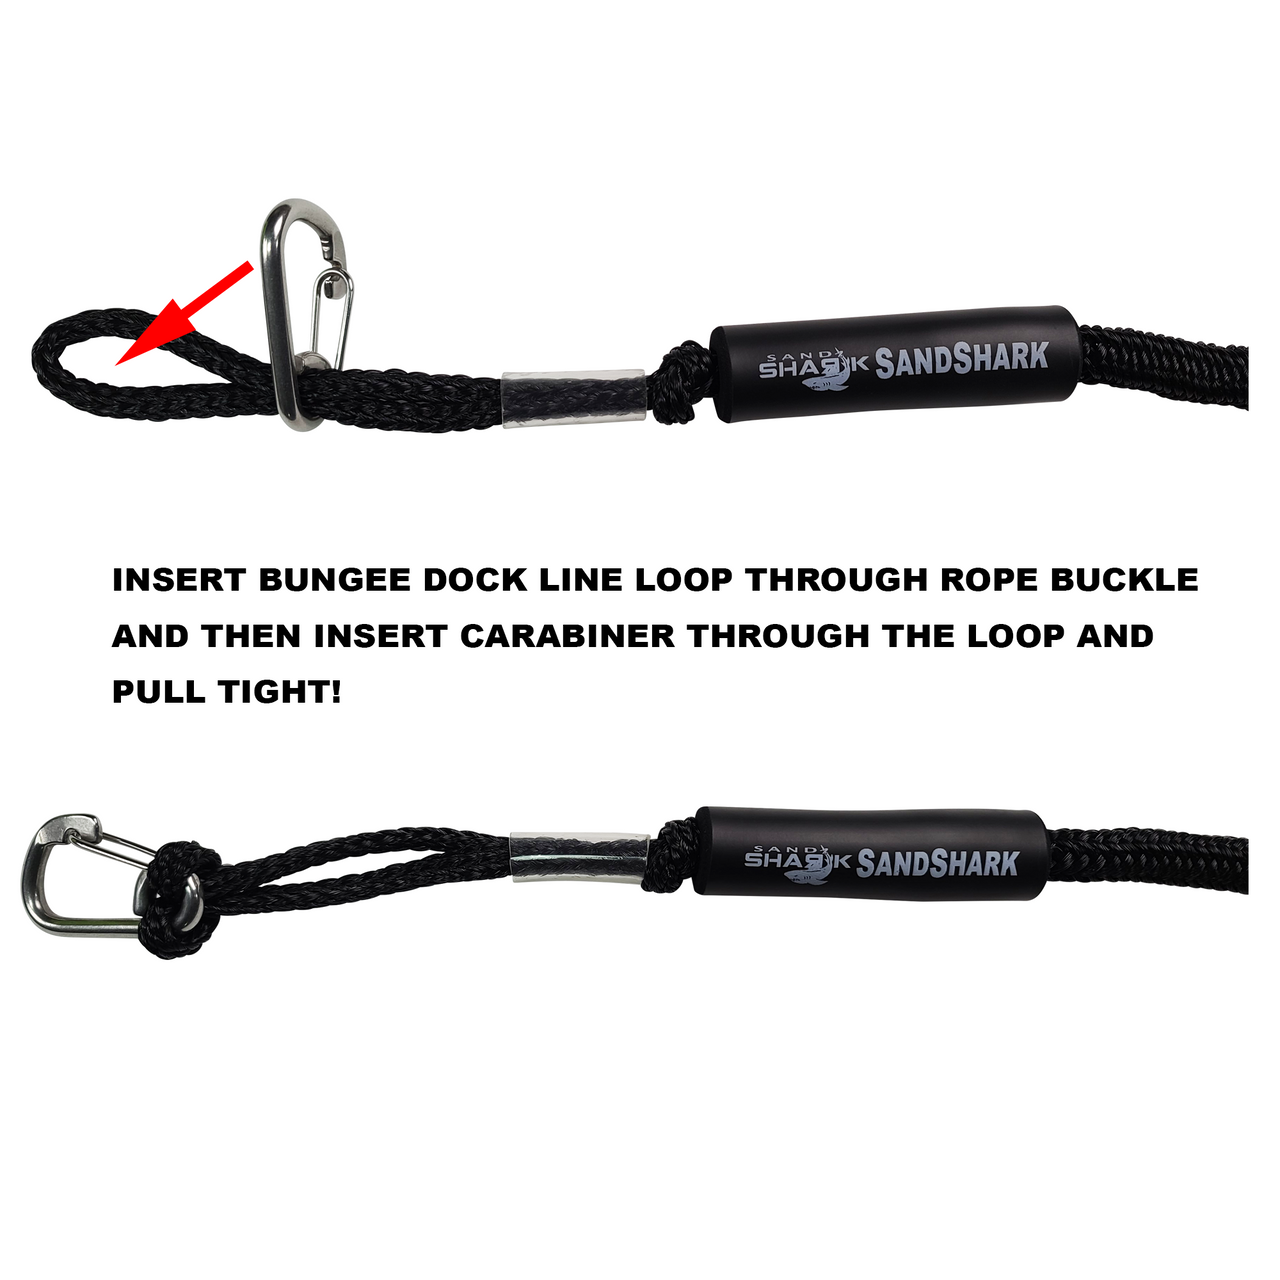 2pcs Carabiner Clip 5/16 inch (8mm) Works Great with Boat Dock